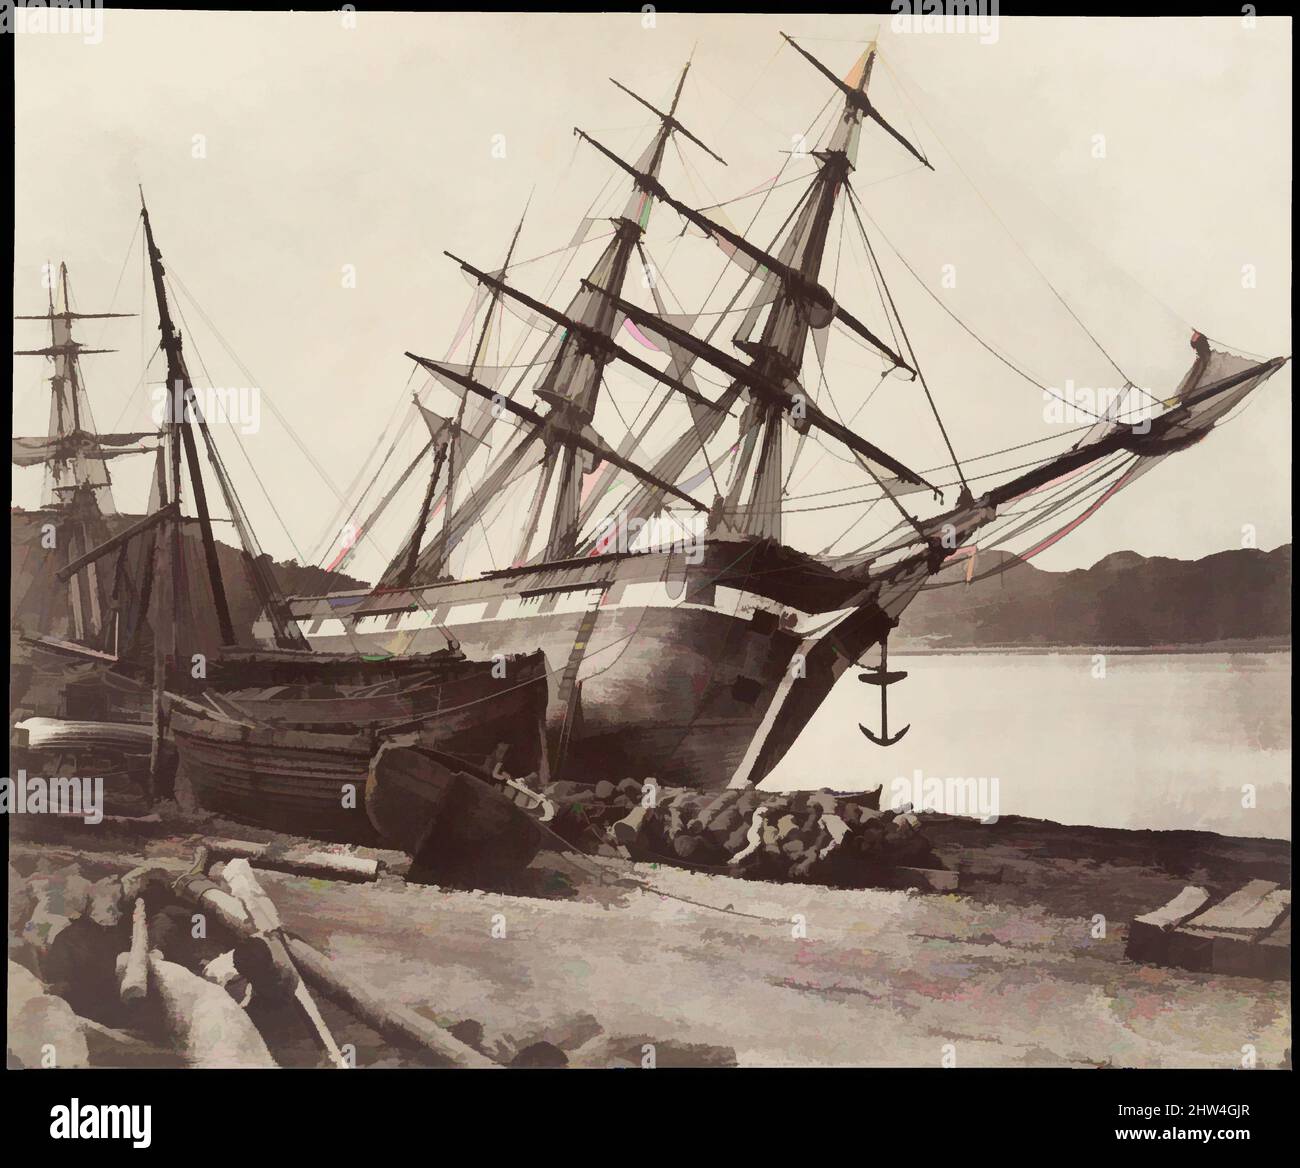 Art inspired by American Barque 'Jane Tudor,' Conway Bay, ca. 1855, Salted paper print from glass negative, 21.9 x 26.7 cm (8 5/8 x 10 1/2 in.), Photographs, David Johnson (British), Little is known about Johnson, and no other picture by him has been identified. He was listed as a ', Classic works modernized by Artotop with a splash of modernity. Shapes, color and value, eye-catching visual impact on art. Emotions through freedom of artworks in a contemporary way. A timeless message pursuing a wildly creative new direction. Artists turning to the digital medium and creating the Artotop NFT Stock Photo